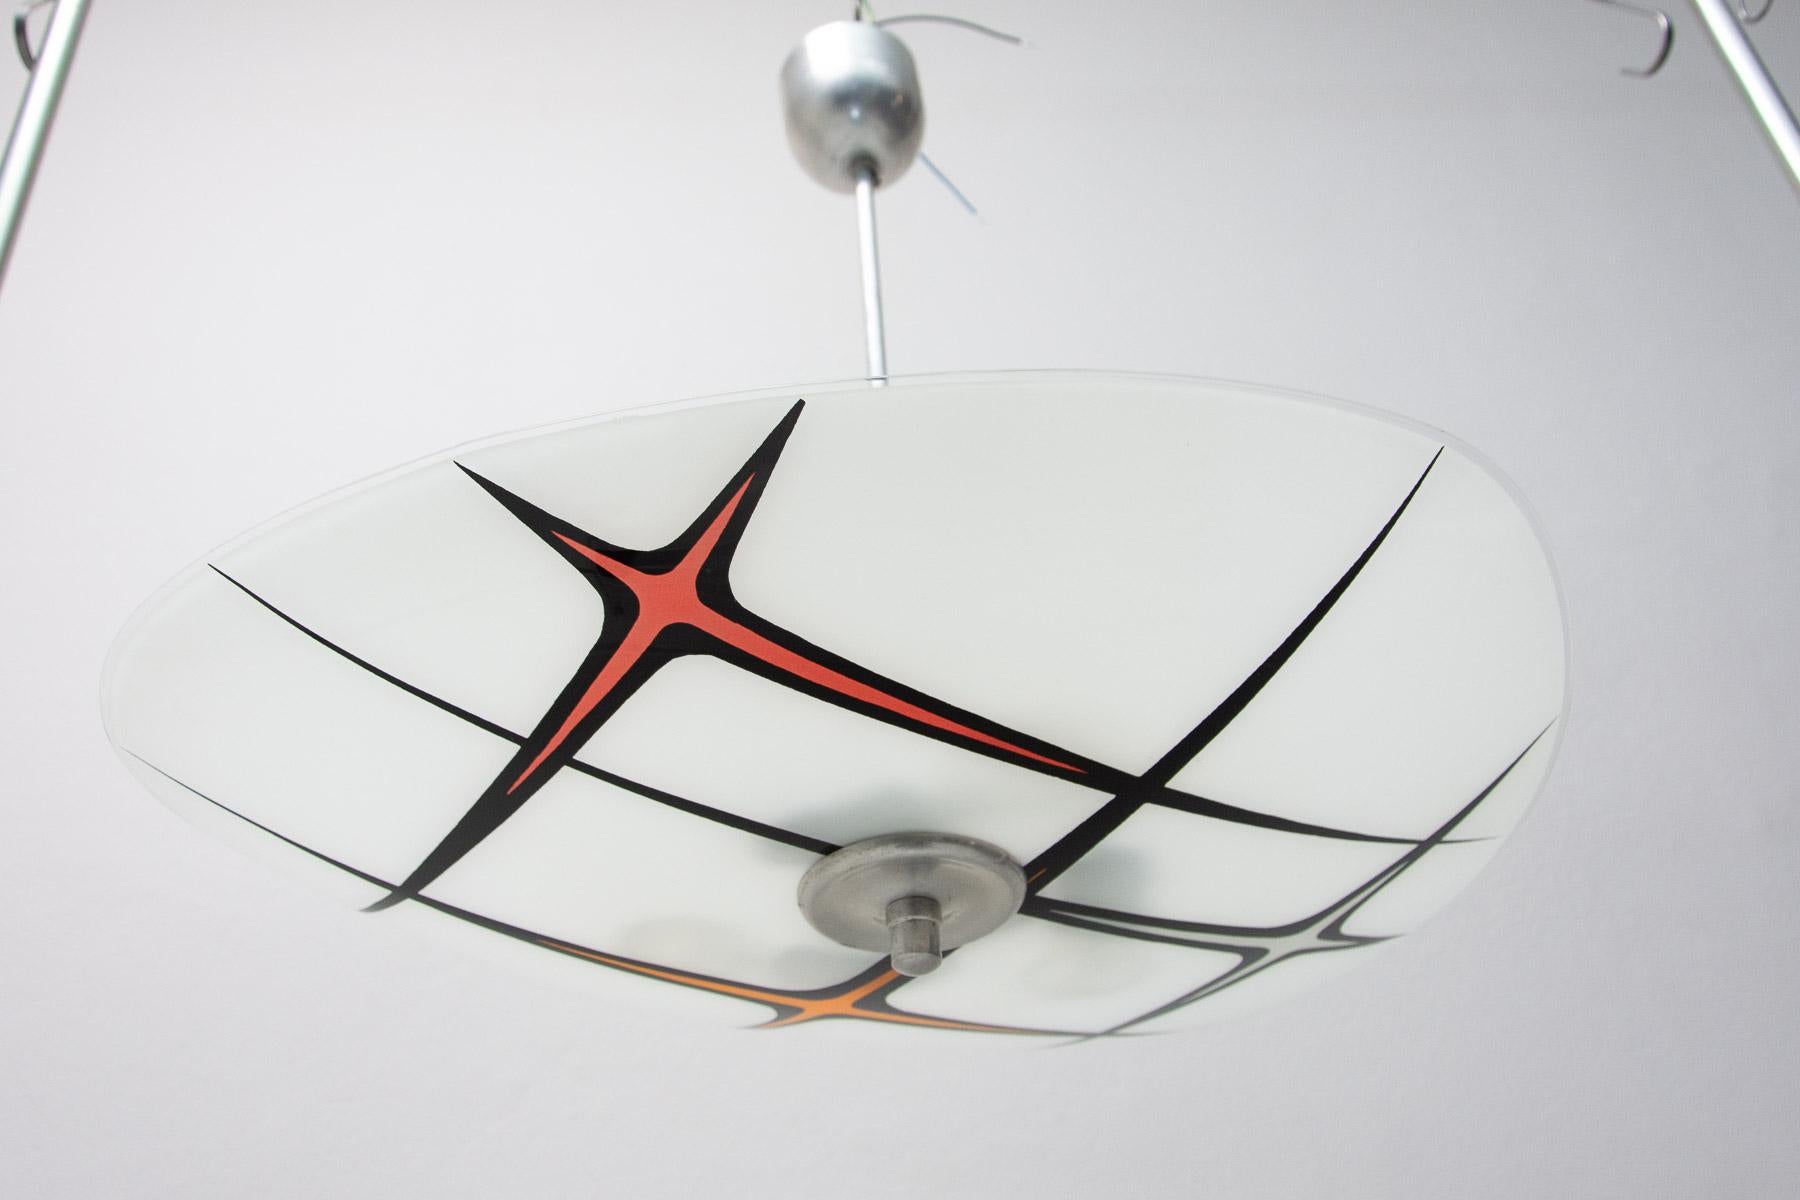 Mid century space age chandelier from the turn of the 50s and 60s connected with the exhibition EXPO 58 in Brussels. Awesome design. Painted motifs. Chrome-plated rod. In very good condition, new wiring.

3 E27 bulbs, Up to 250